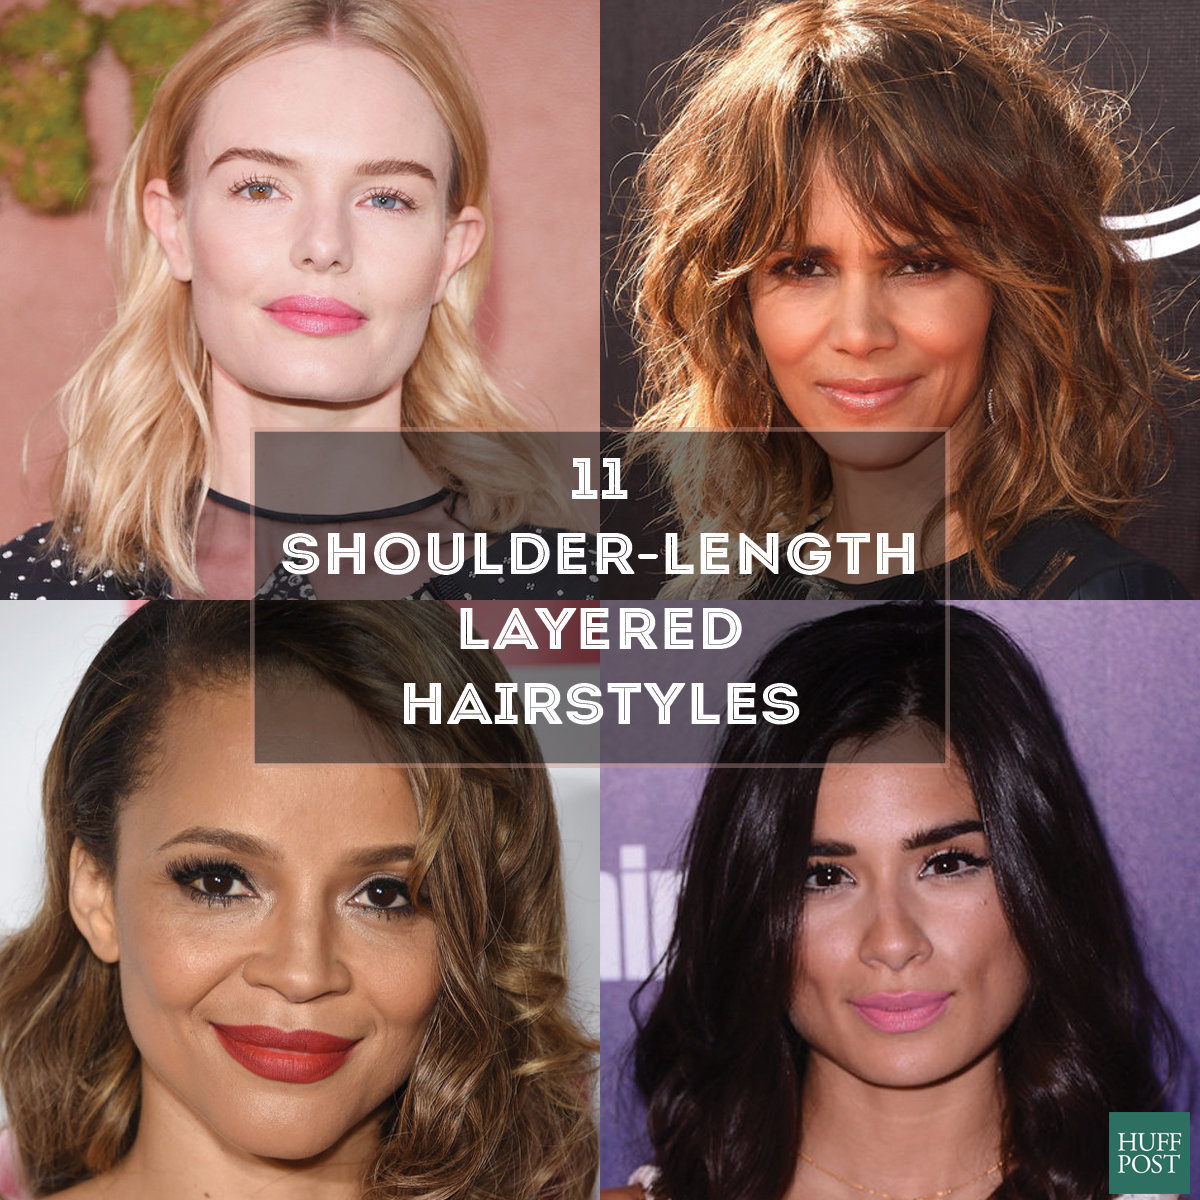 30 MidLength Haircuts With Fringe Bangs That Balance Edge and Elegance